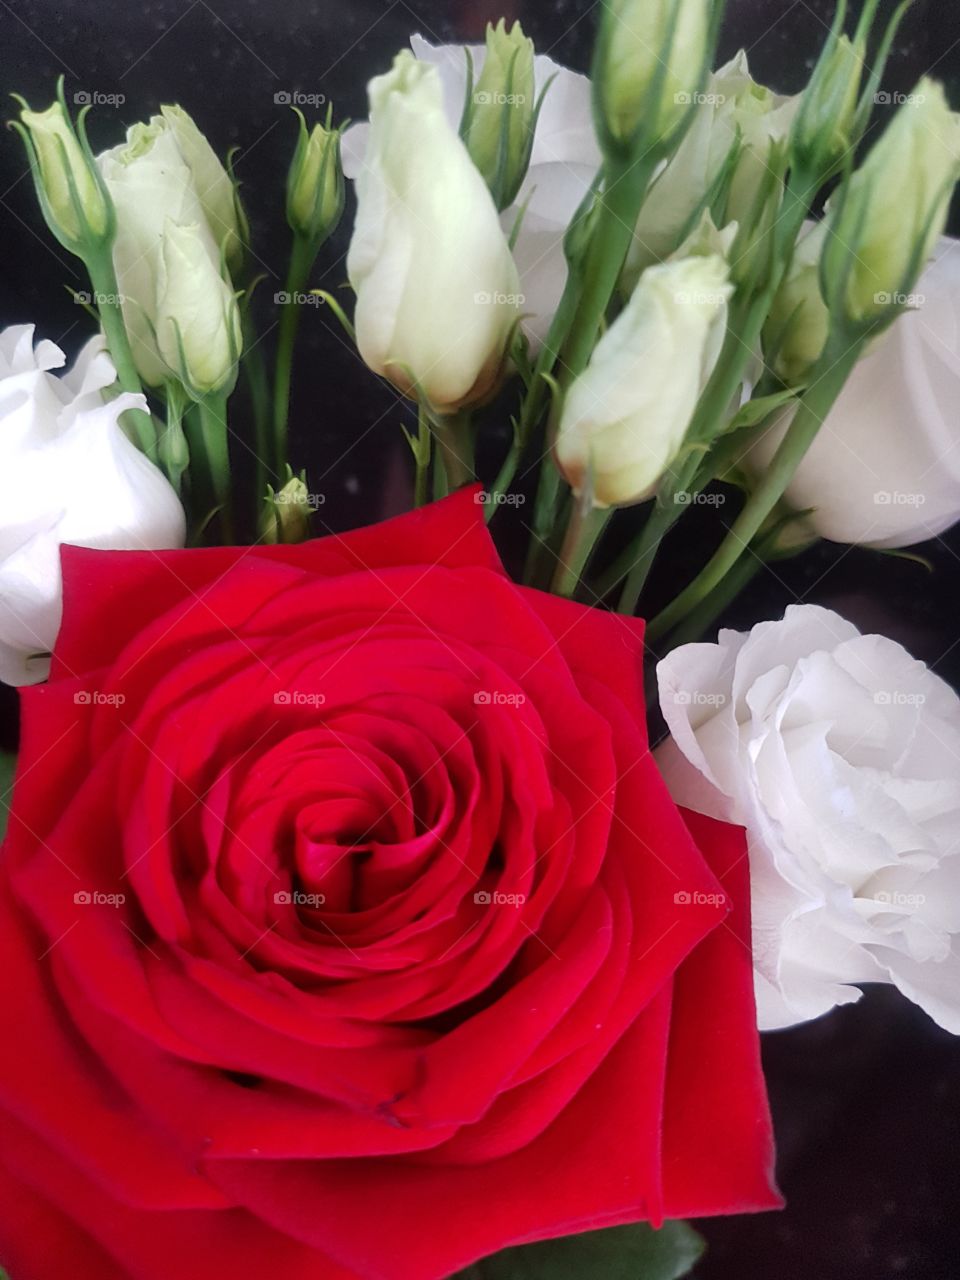 swirling red rose against white lysianthus